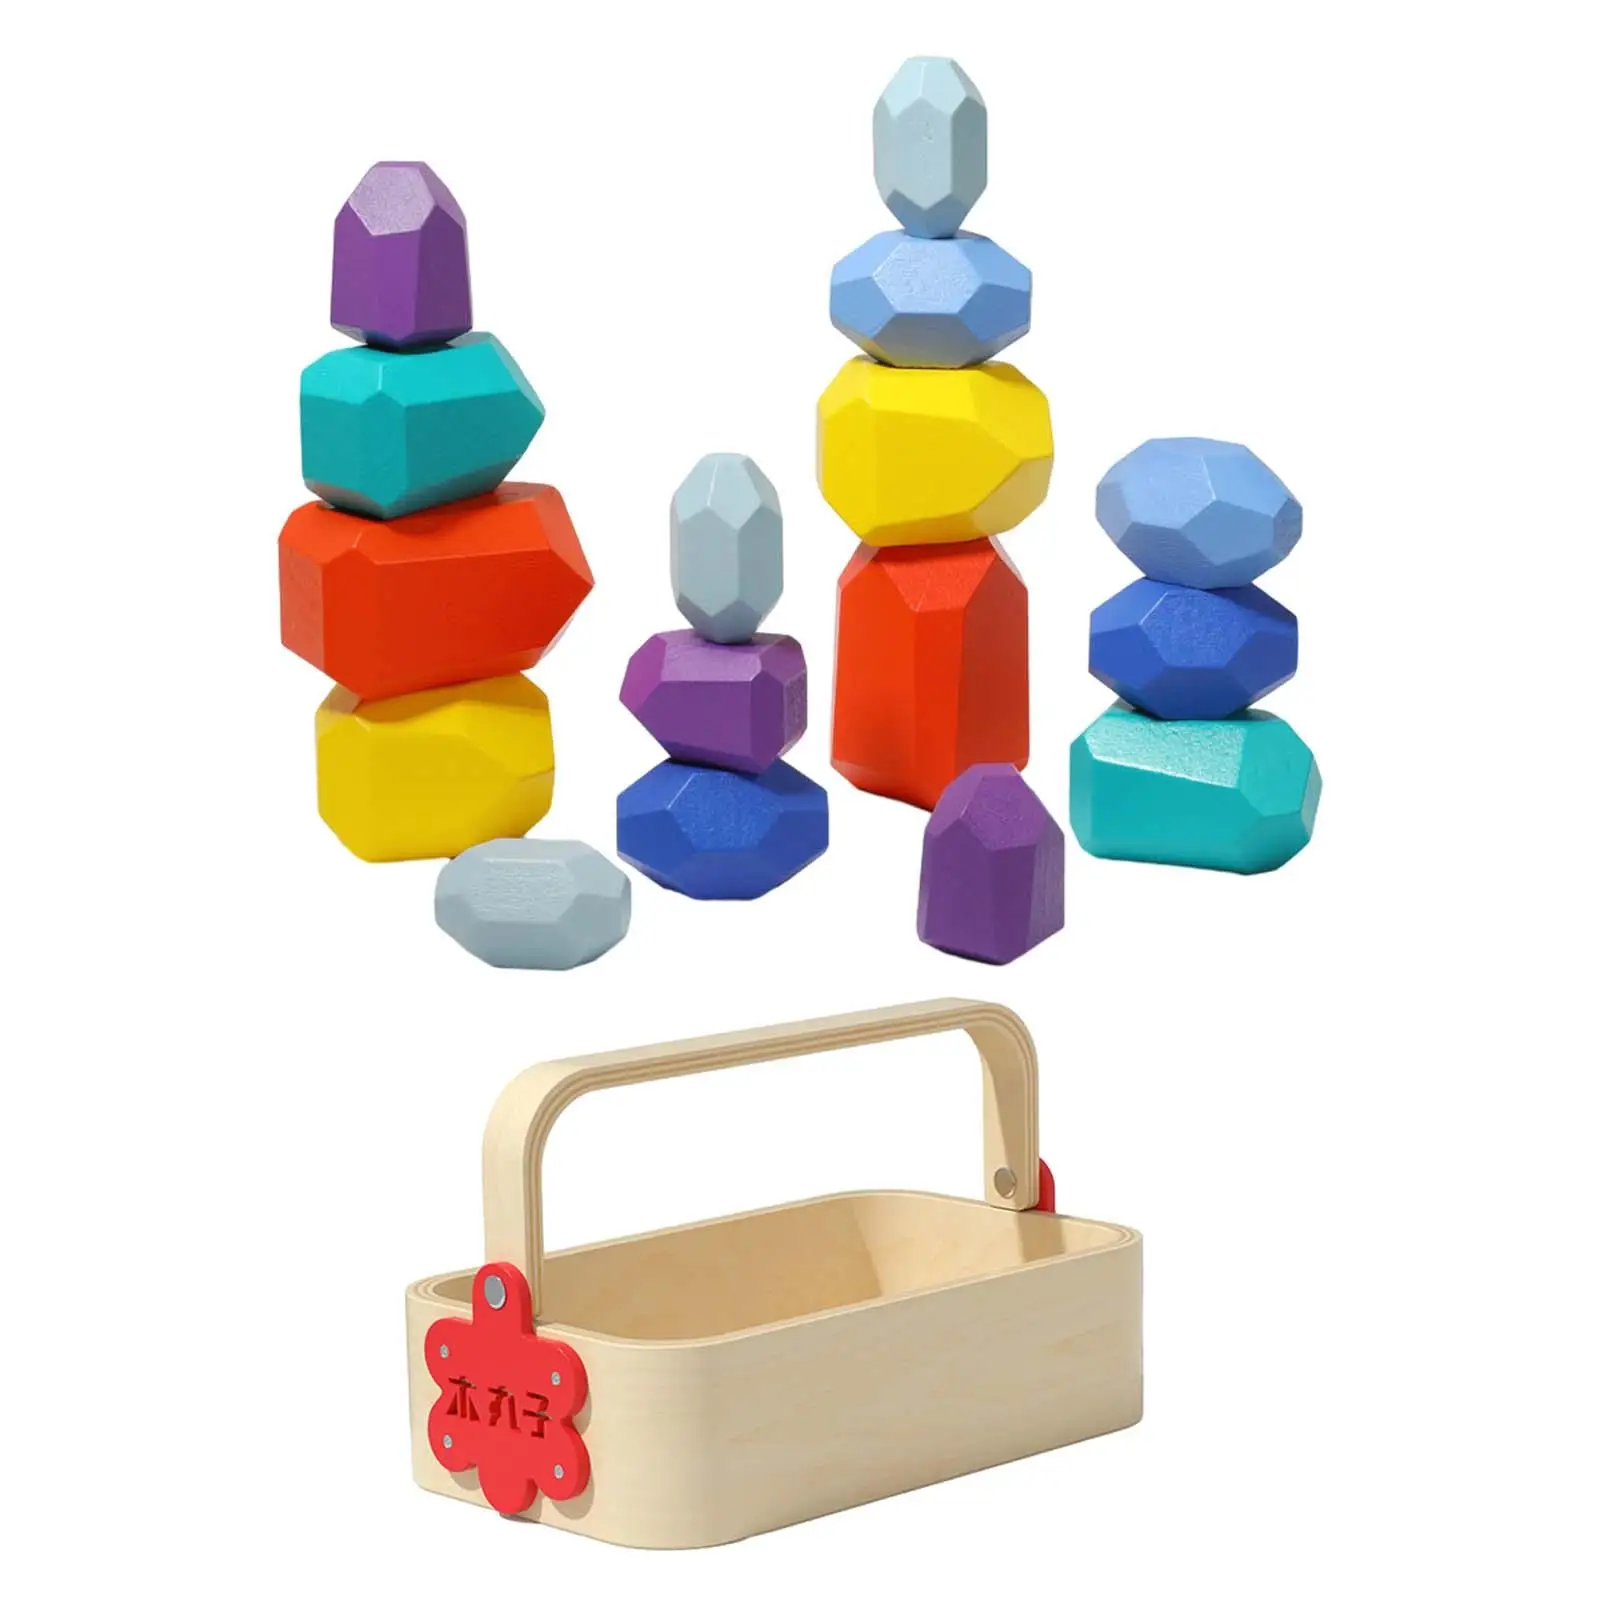 Stacking Stones Hands on Balance Training Toys Educational Toy Montessori Toys Wooden for Children Girls Boys Birthday Gifts